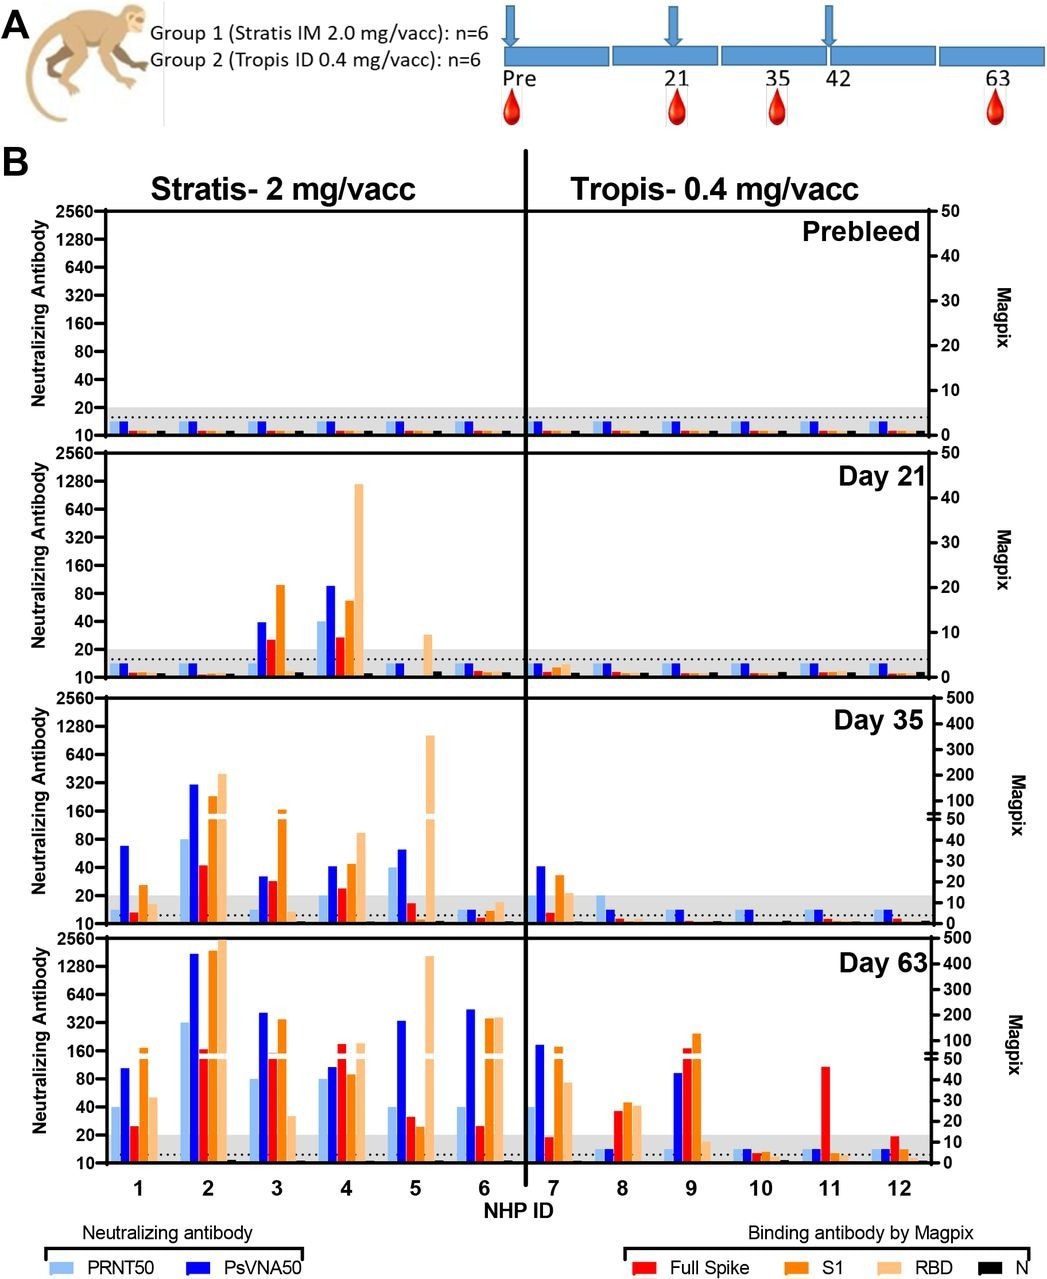 Neutralization and binding of antibody responses.  PRNT50, PsVNA50 and Magpix titers were collected from sera at different time points.  design.  (Blue arrows = vaccine doses, red drops = blood collection points).  b) Neutralization and binding of antibody values ​​at the indicated time points.  The lower scan boundaries are shown as a gray shaded area.